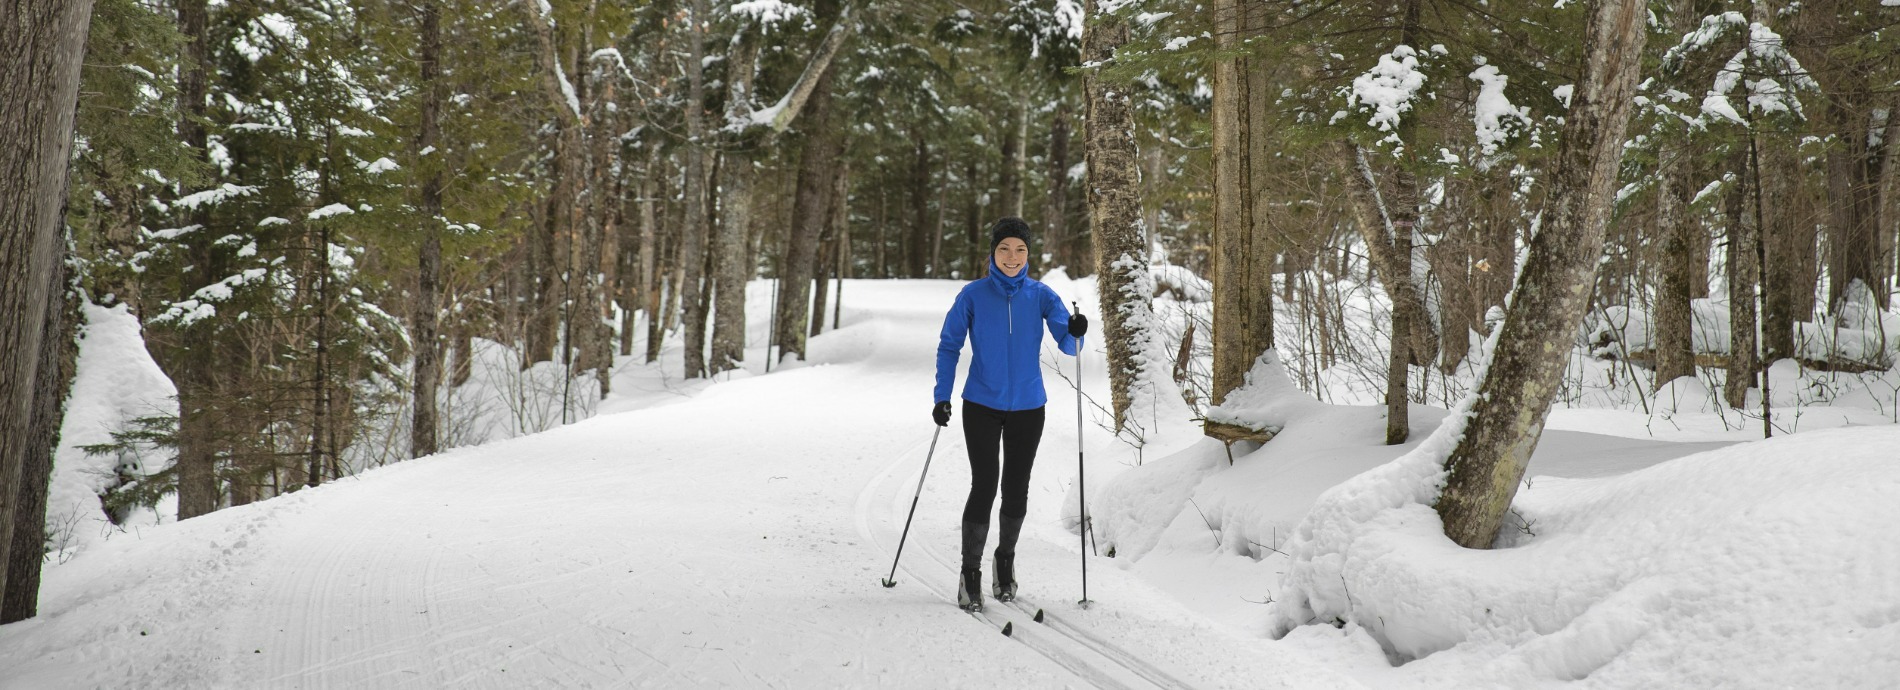 woman cross country skiing through a well treed trail in winter